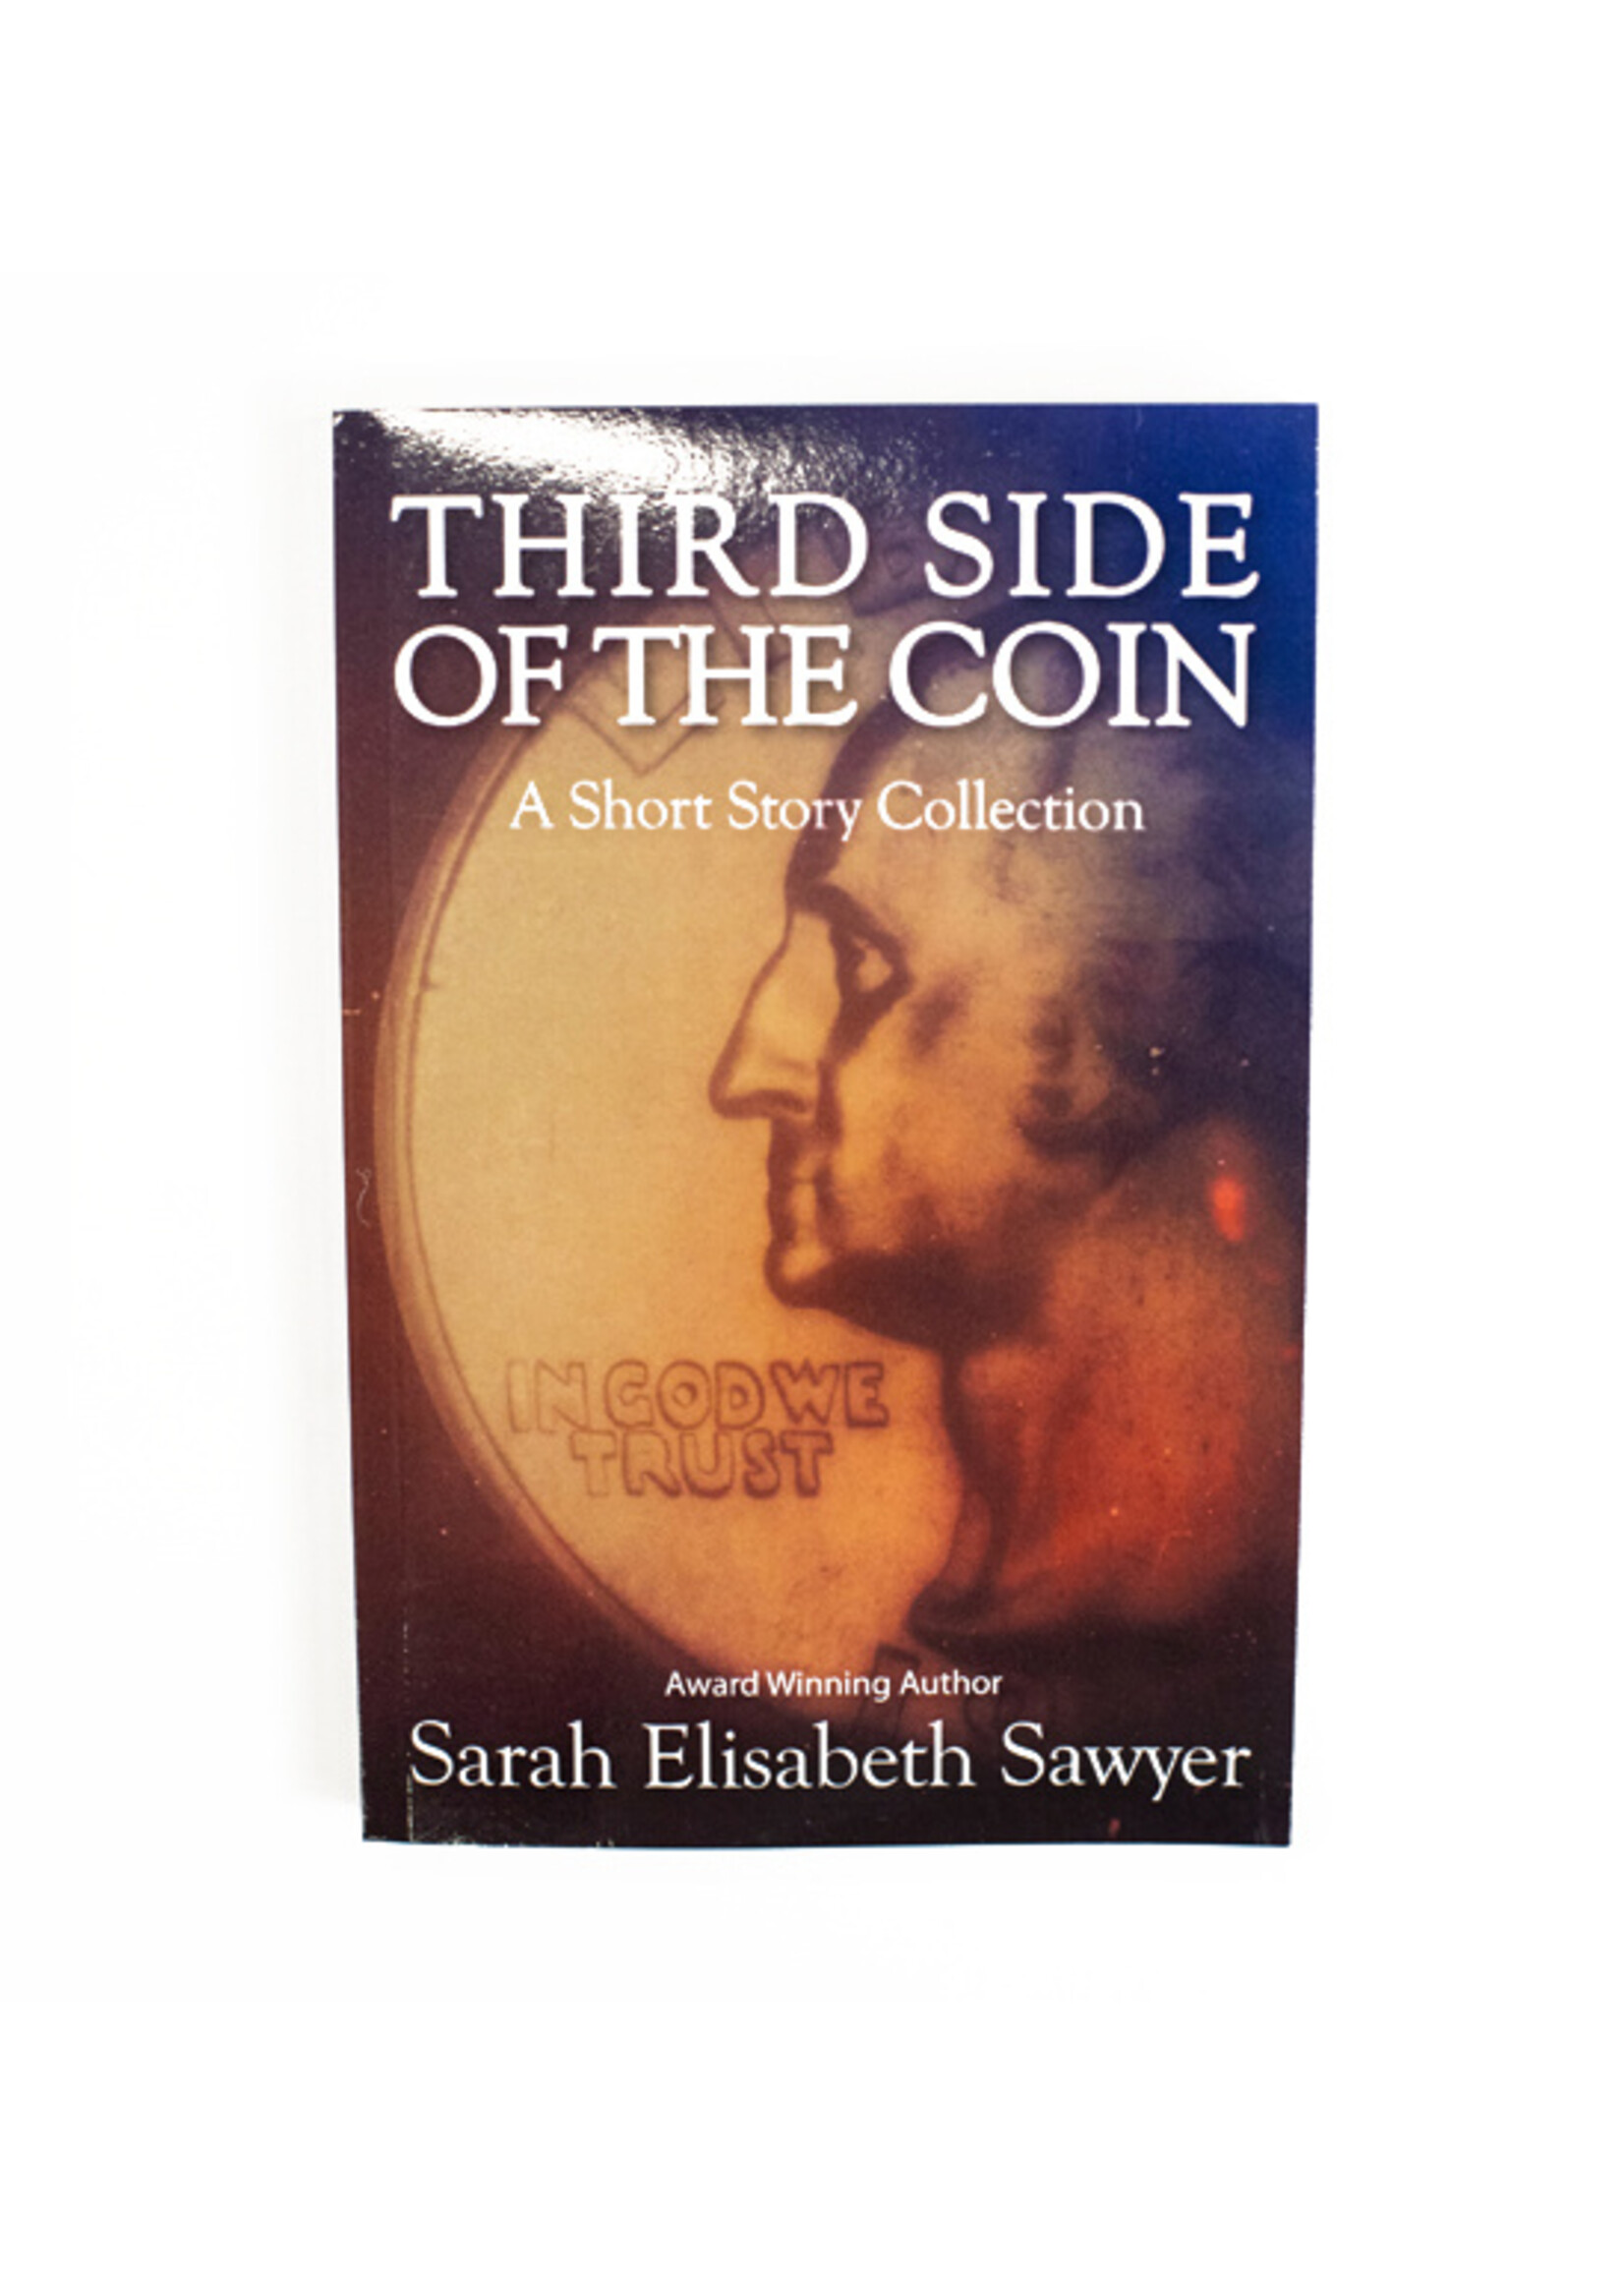 *SES "Third Side Of The Coin" - Paperback – 2014 by Sarah Elisabeth Sawyer (Author)